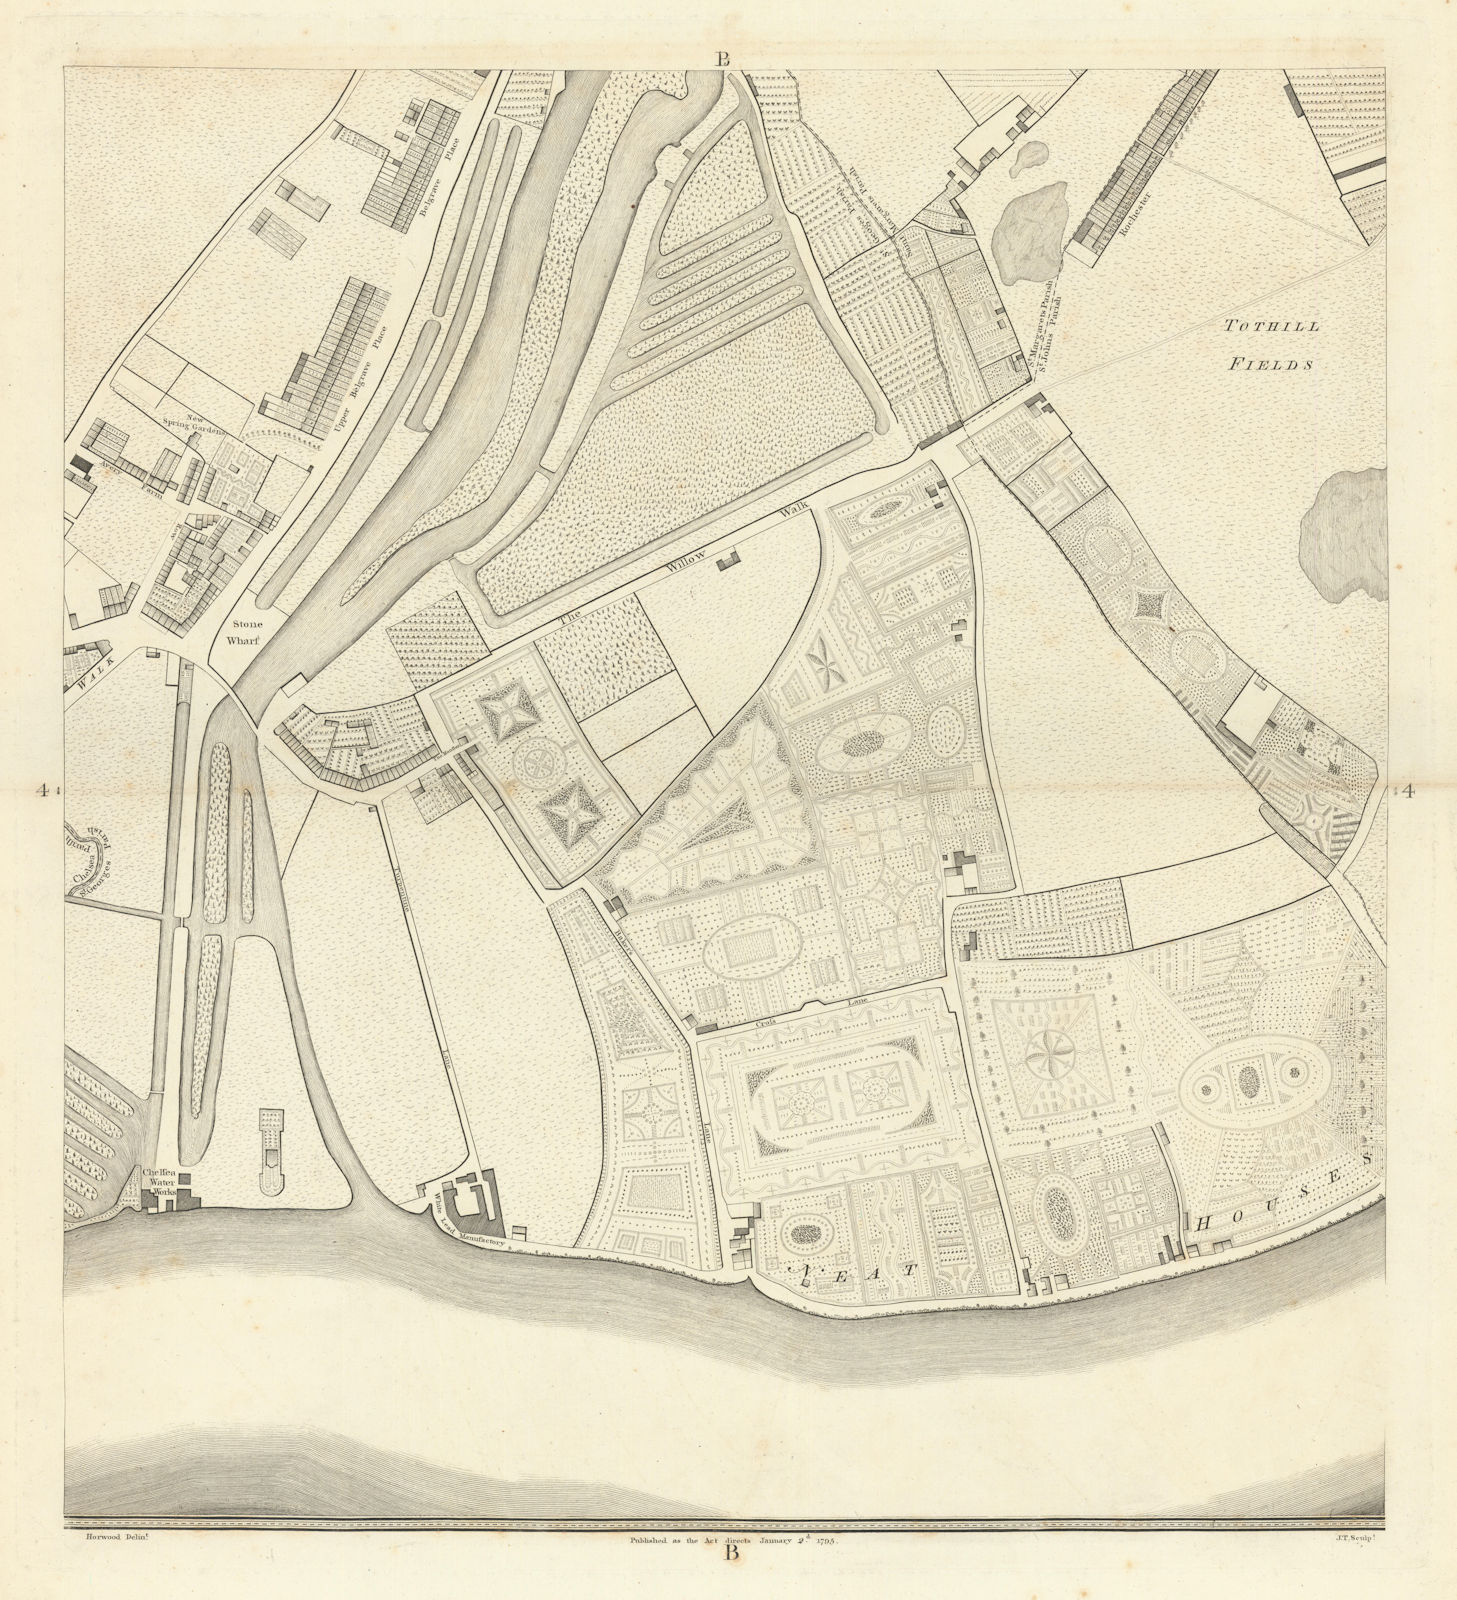 Horwood London B4 Pimlico Victoria Millbank Tothill Fields 1795 old map